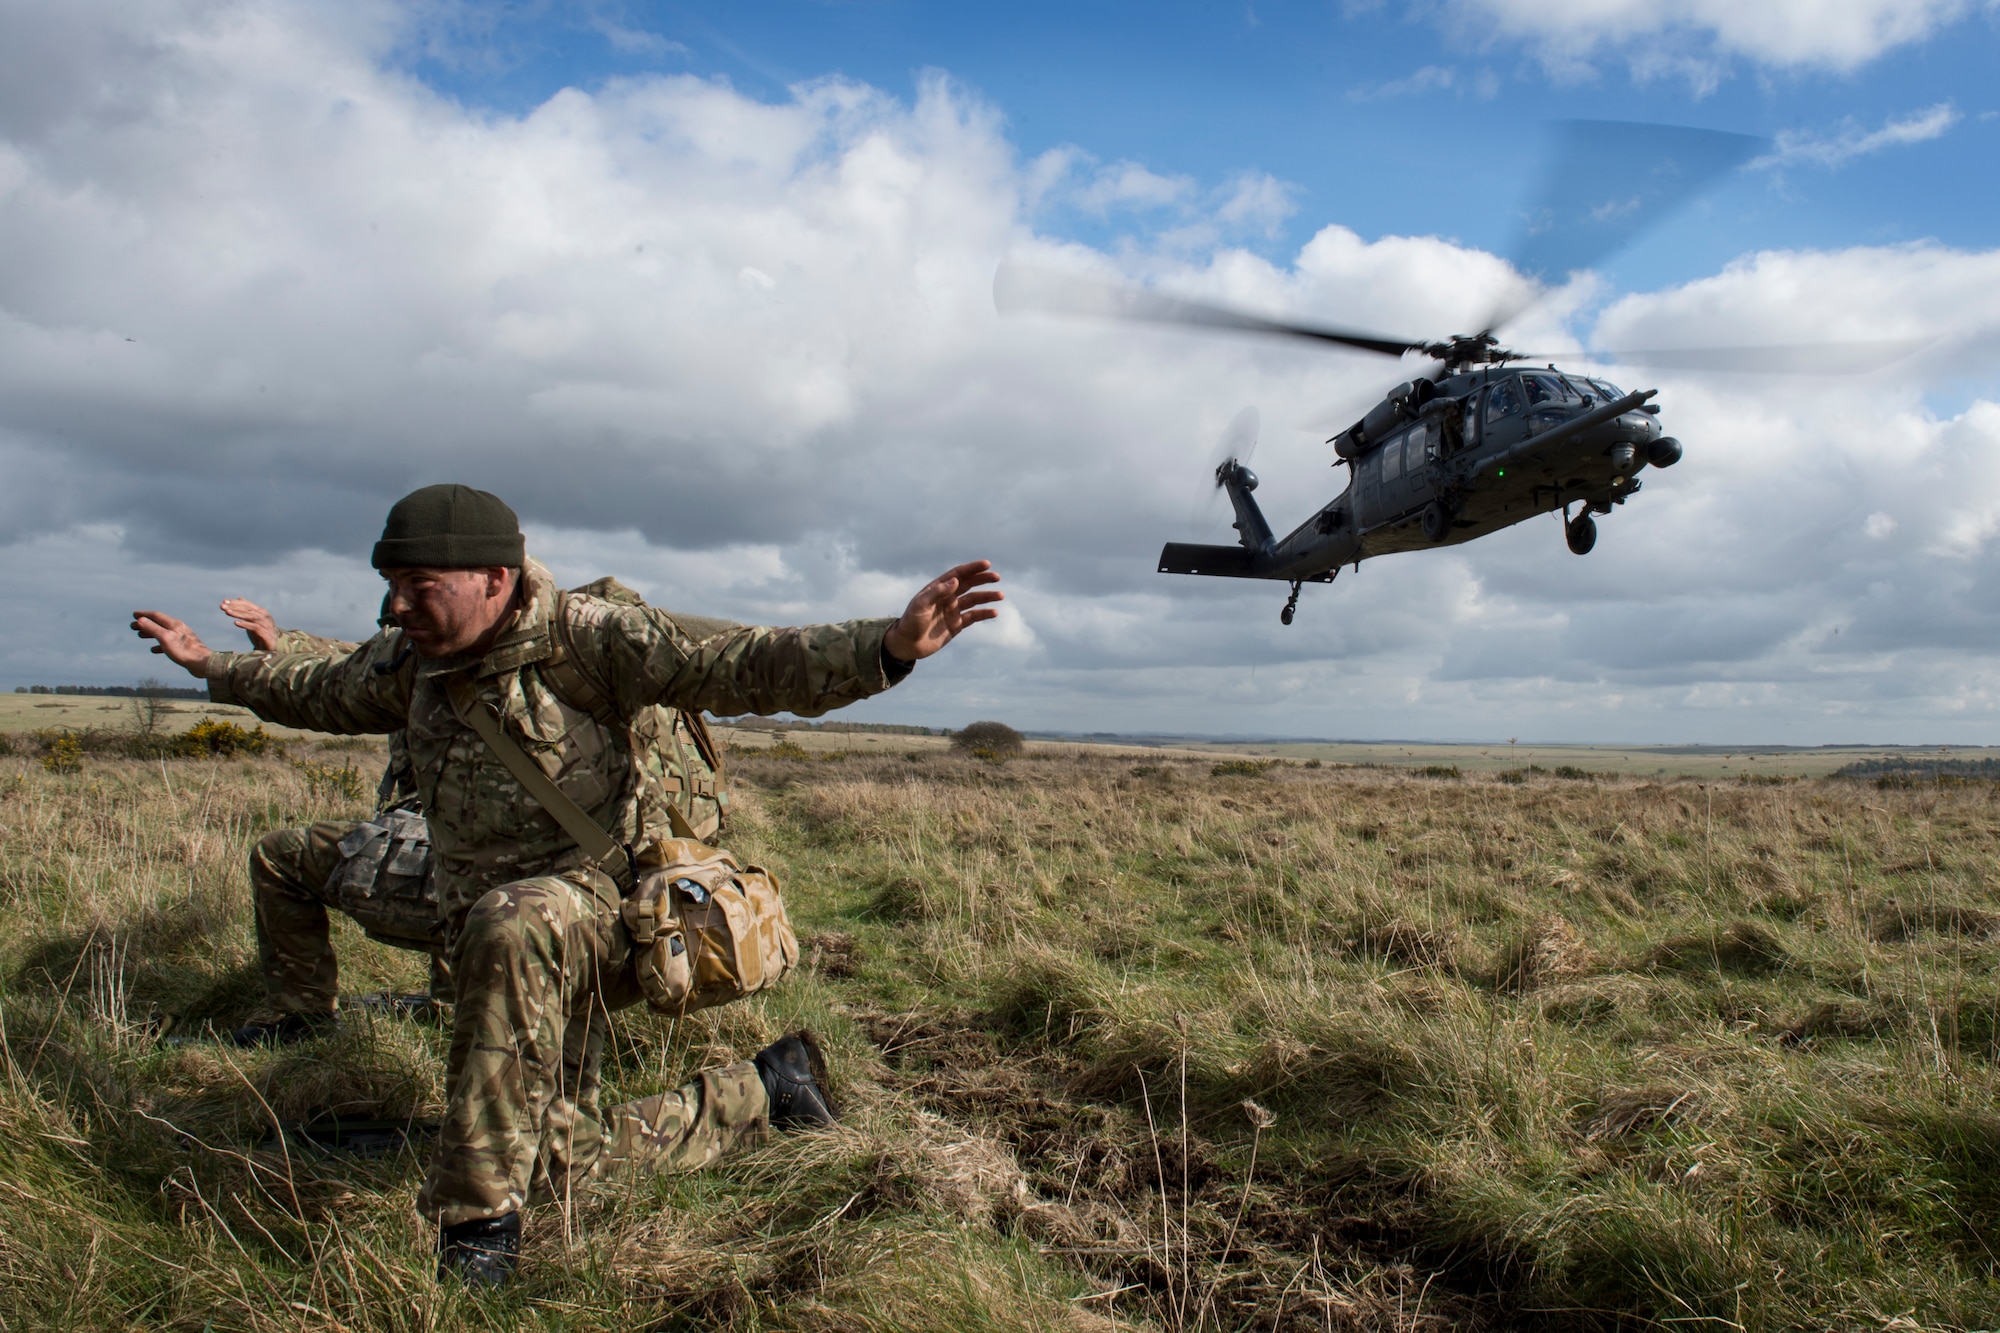 Two British Army AH-64 Apache pilots from 663 Squadron, 3 Regiment Army Air Corps, wait to be extracted from the field by an HH-60G Pave Hawk during a rescue scenario as part of exercise Voijek Valour at Salisbury Plain, England, March 3, 2016. The exercise helped strengthen relationships established when U.S. and U.K. military forces worked together in Afghanistan. (U.S. Air Force photo/Airman 1st Class Erin R. Babis)